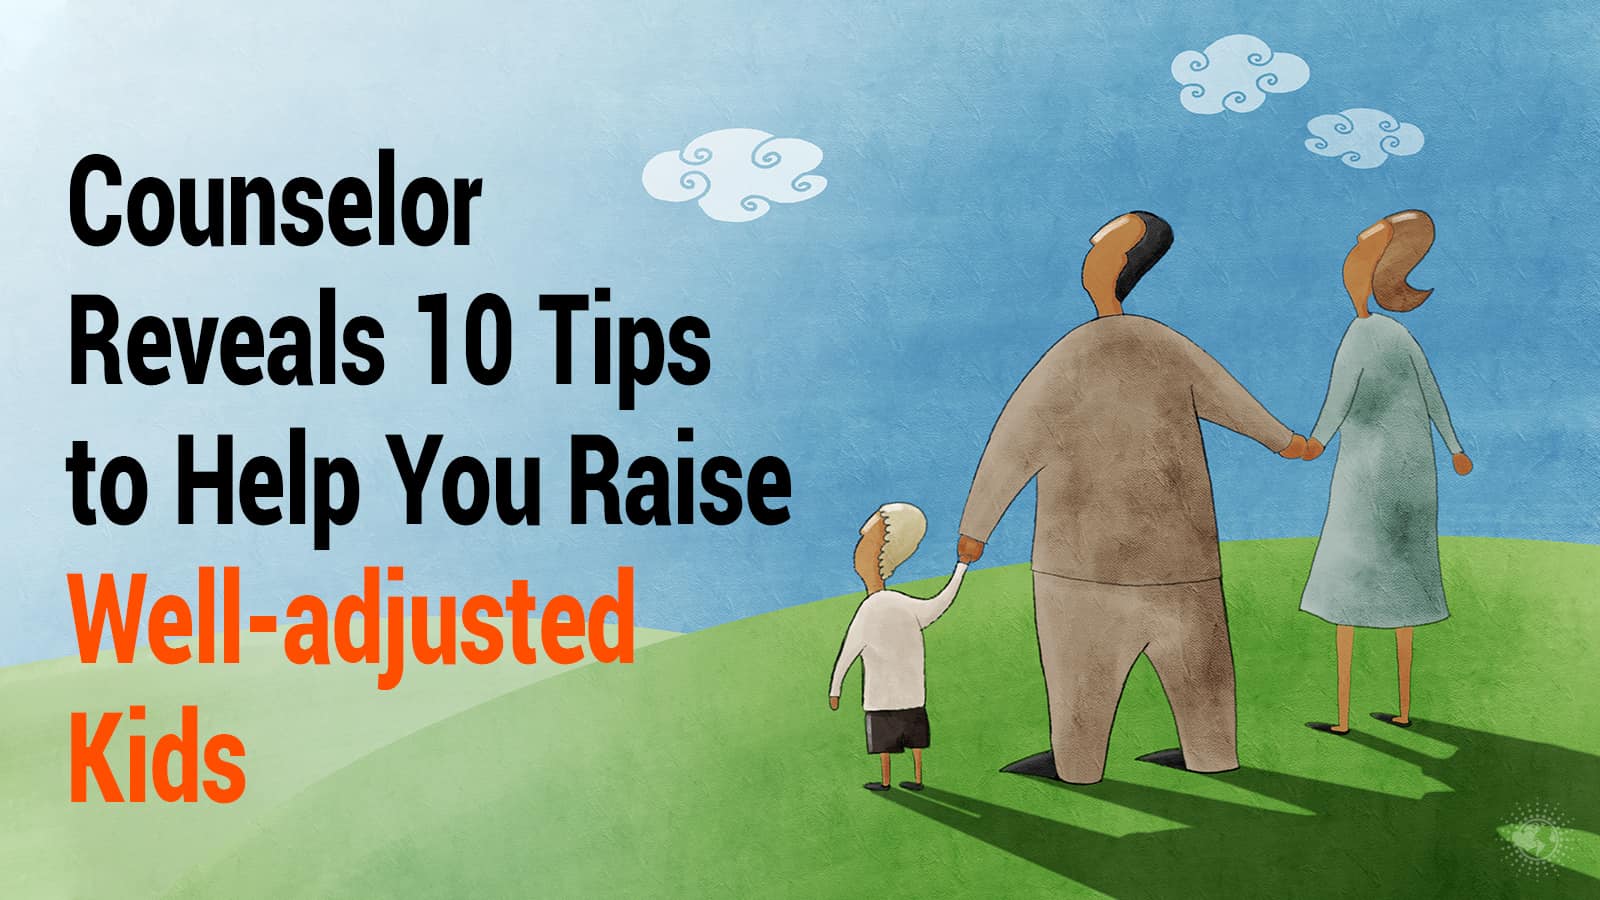 Counselor Reveals 10 Tips to Help You Raise Well-adjusted Kids